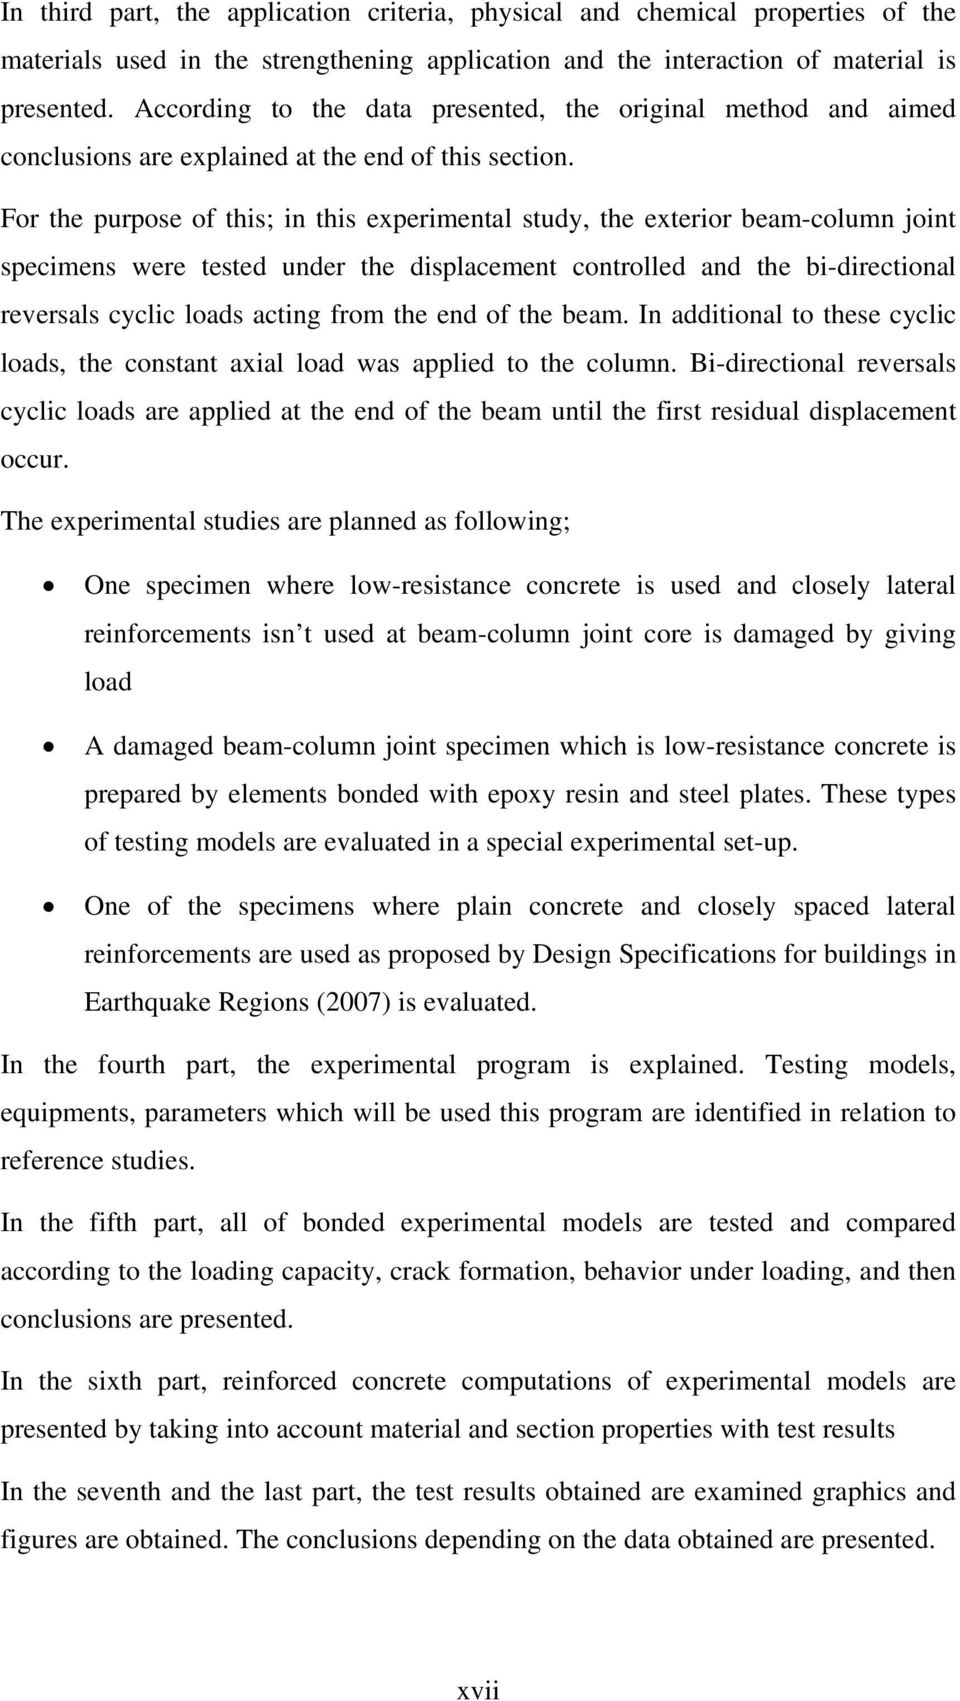 For the purpose of this; in this experimental study, the exterior beam-column joint specimens were tested under the displacement controlled and the bi-directional reversals cyclic loads acting from